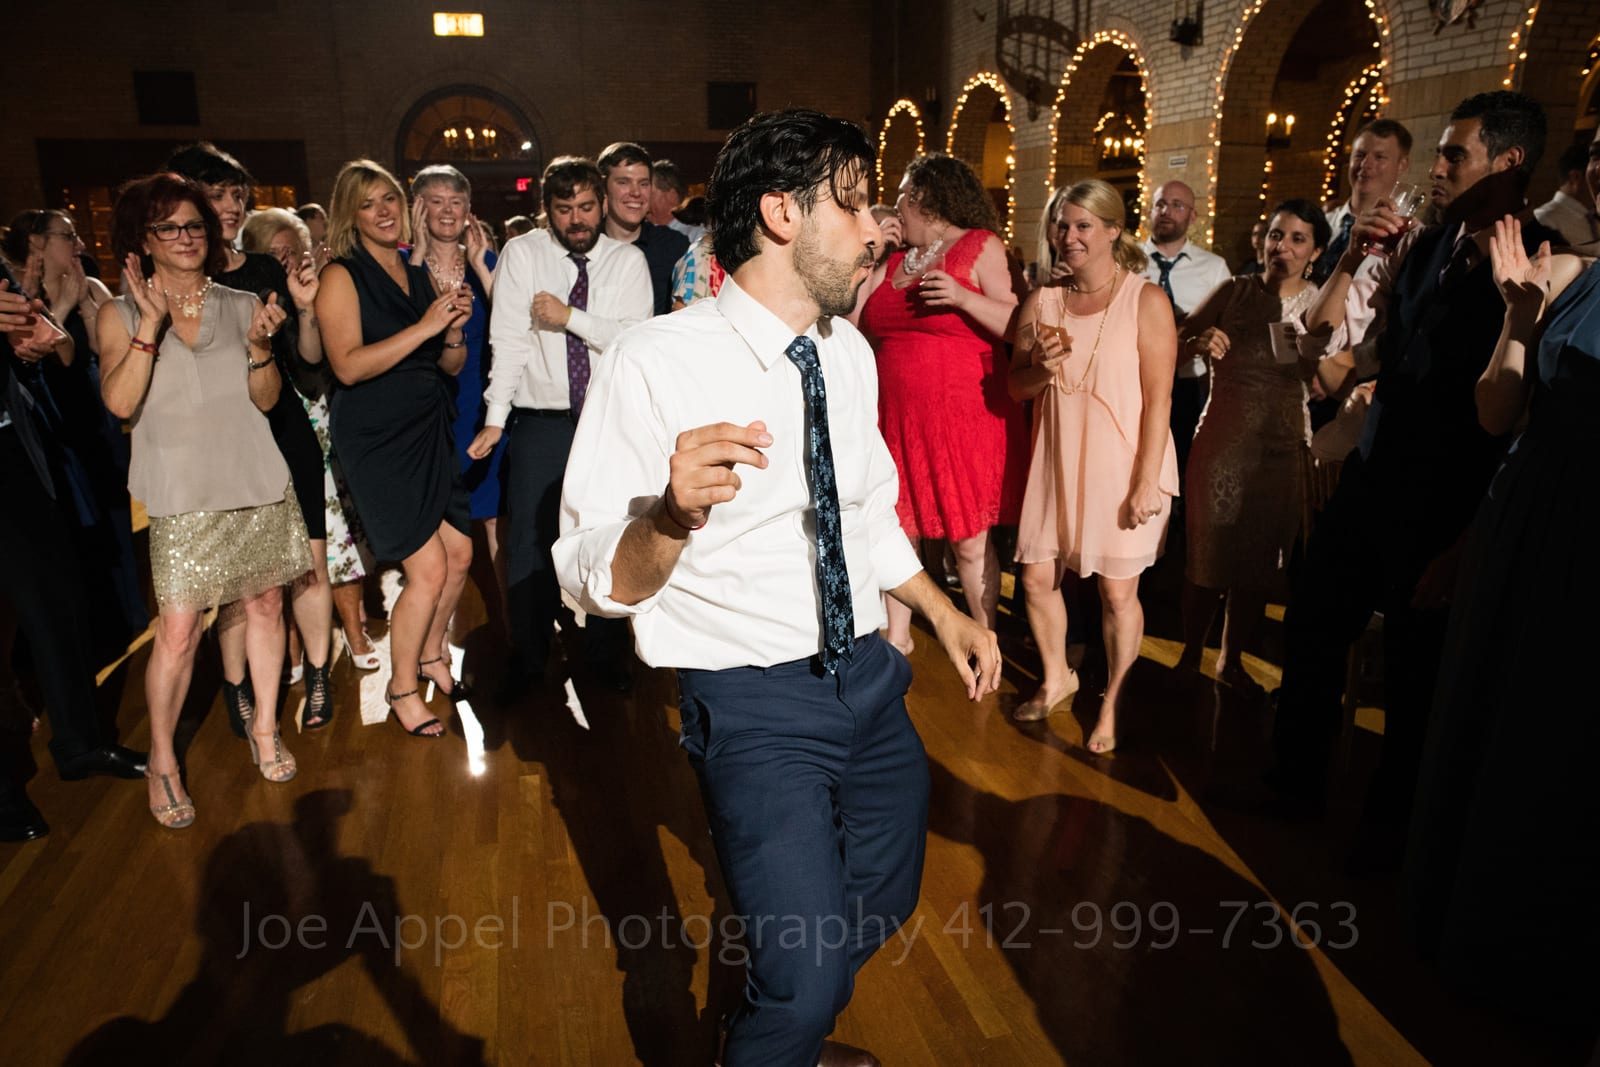 A sweaty groom dances in front of a group of wedding guests during a St Francis Hall Washington DC wedding.